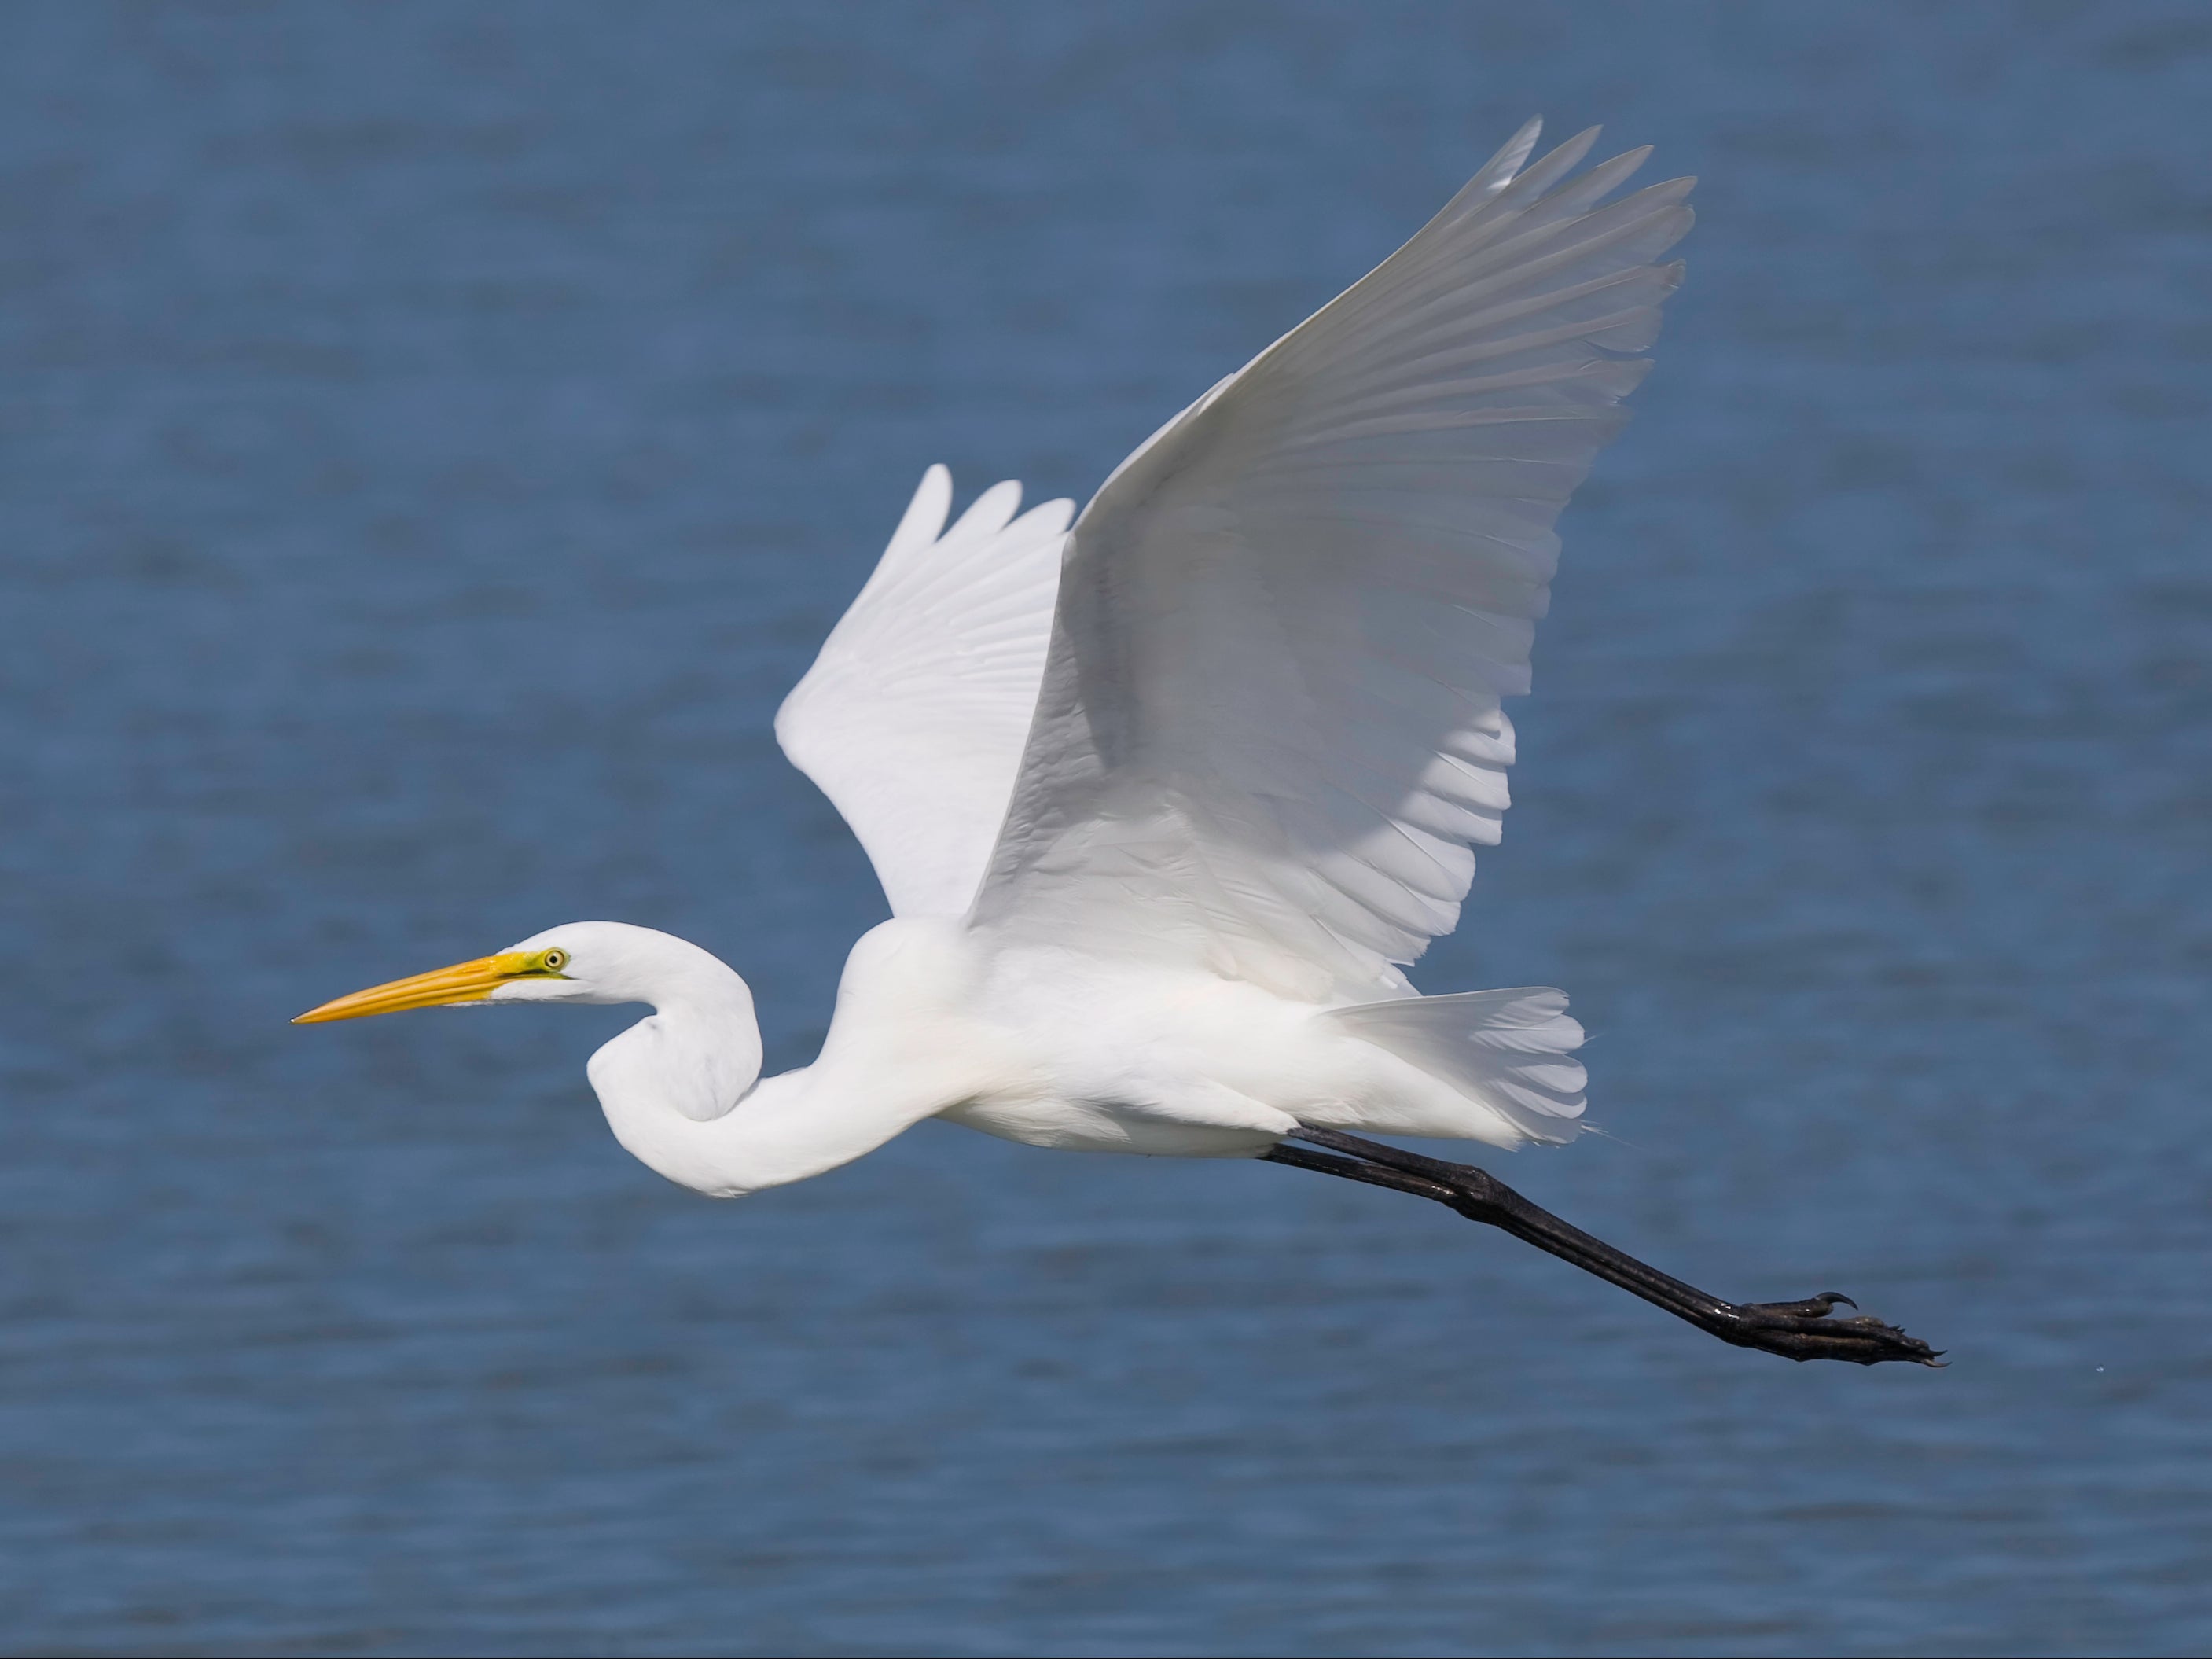 Over 8,000 great white egrets were spotted in the UK in 2020, up from 1,000 in 2010